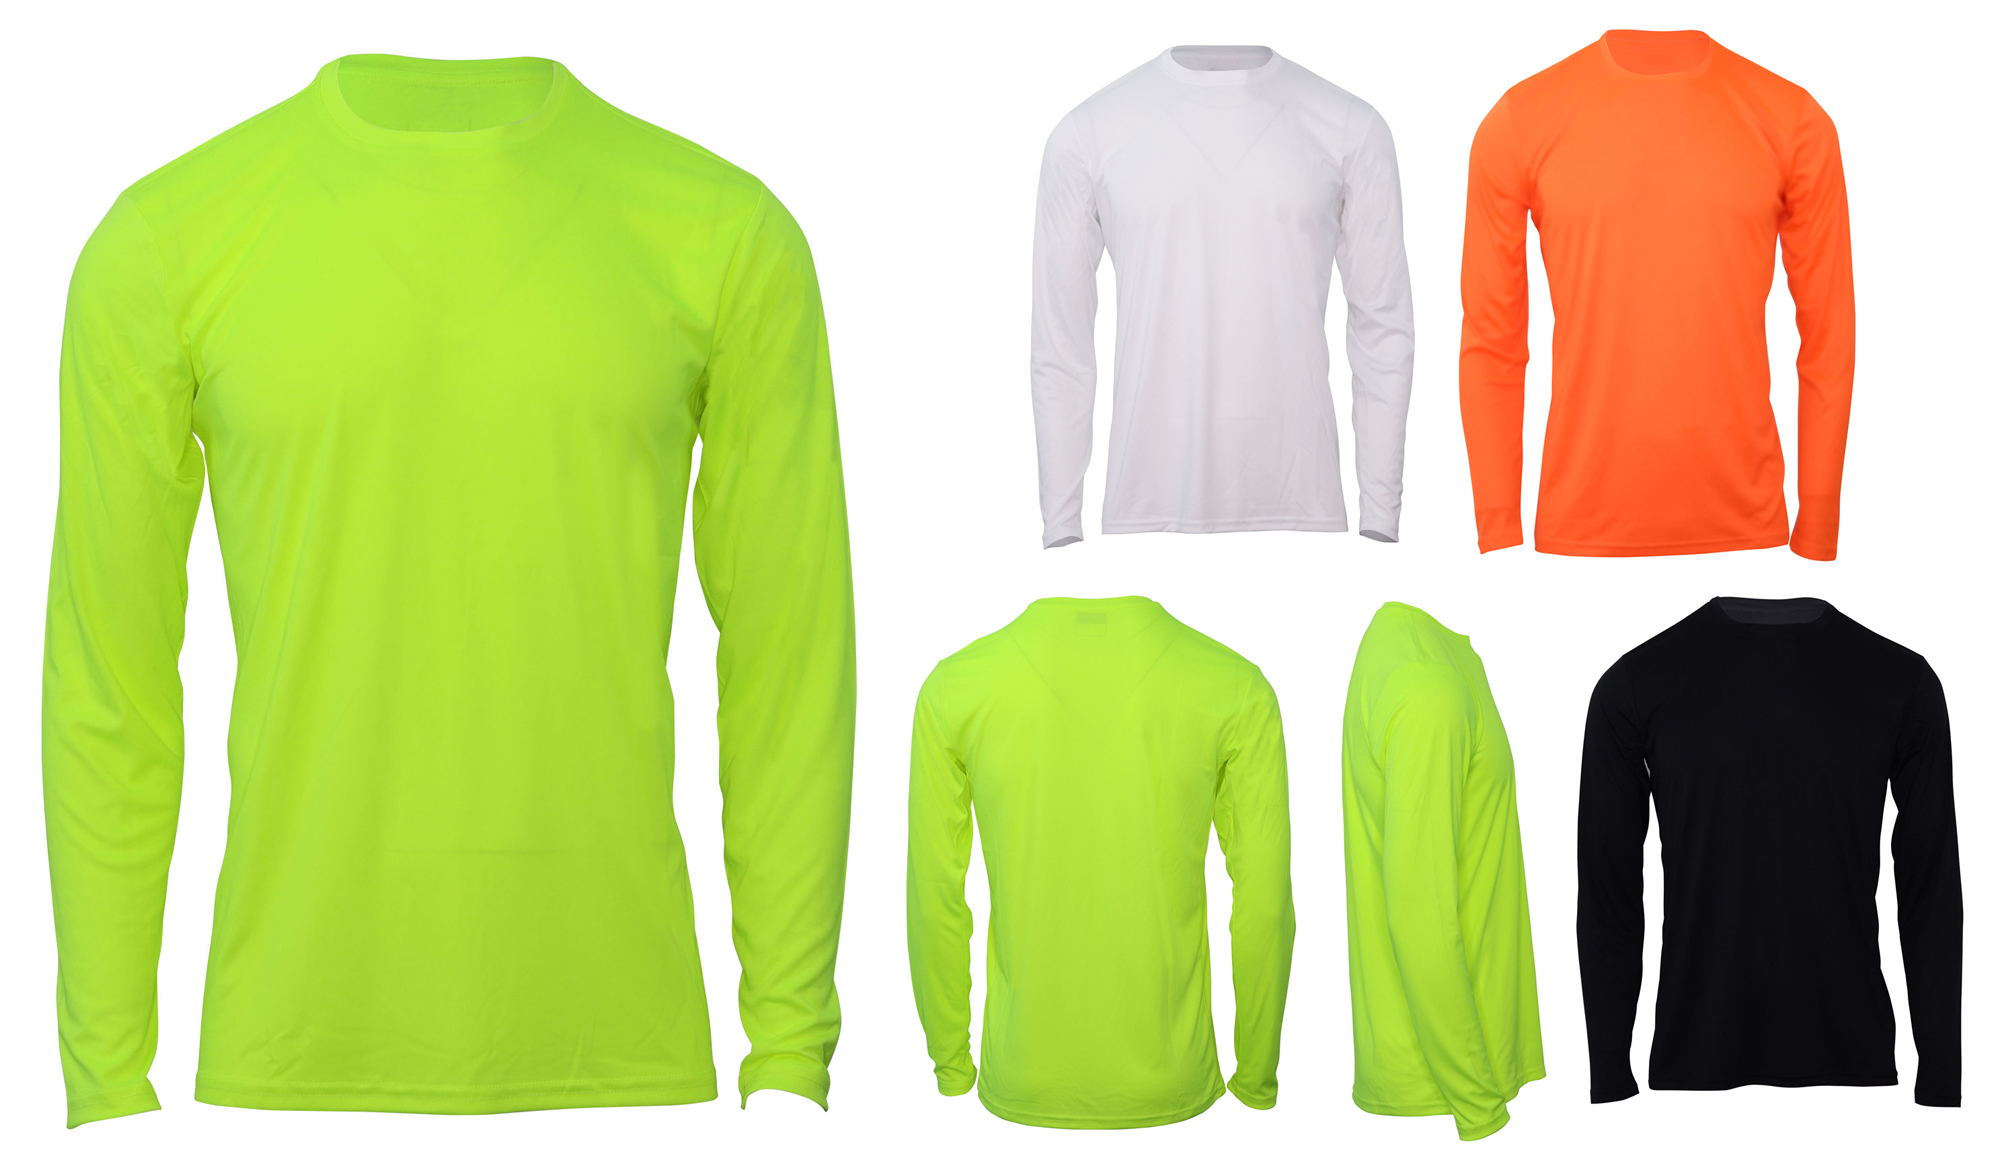 Men's Base Layer Crew Neck Long Sleeve SHIRTs - Choose Your Color(s)